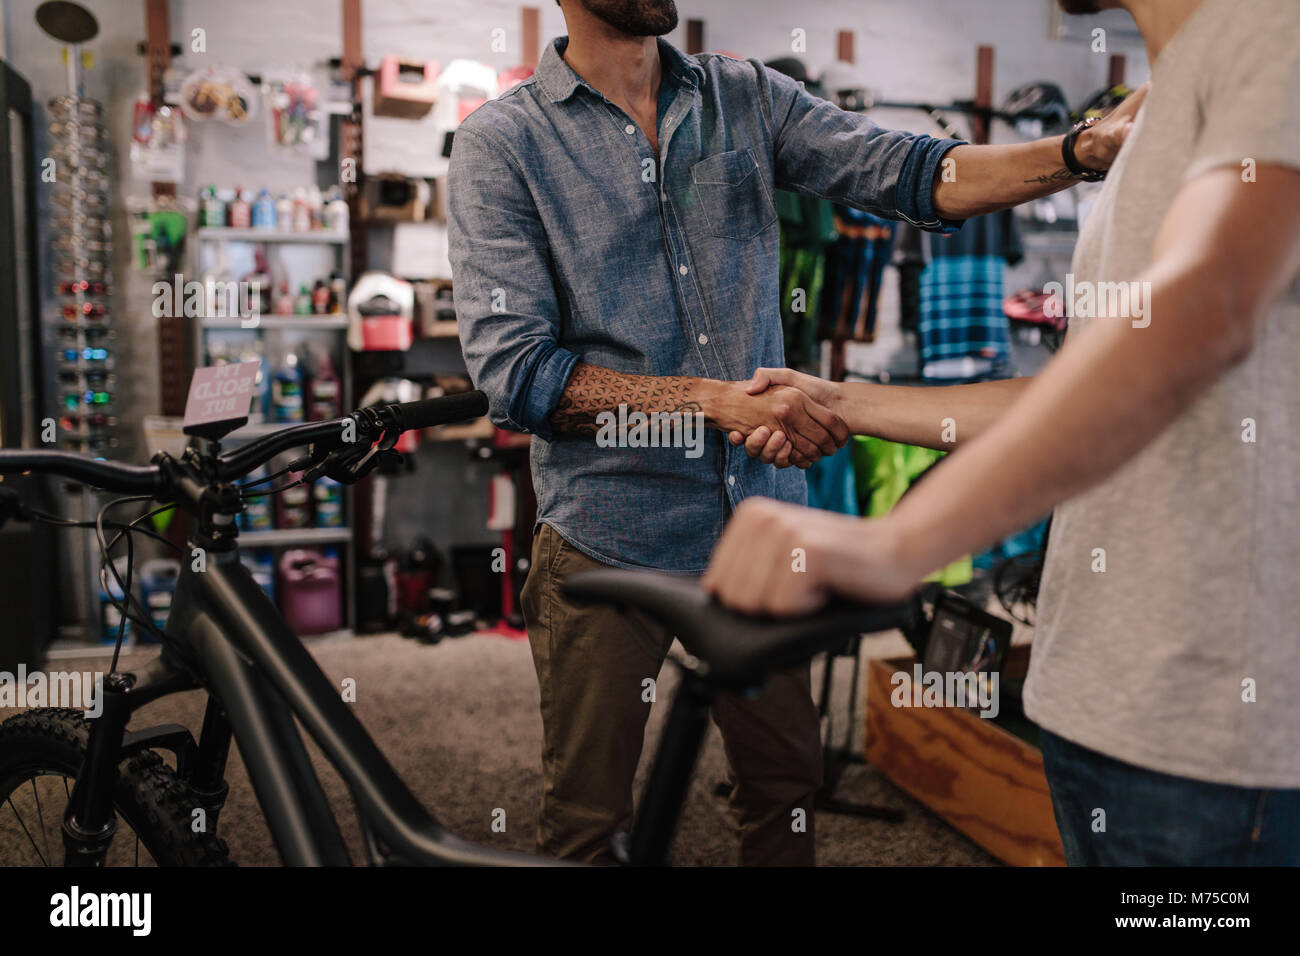 Cropped shot of shop owner giving a handshake to a customer after selling a bicycle. Stock Photo